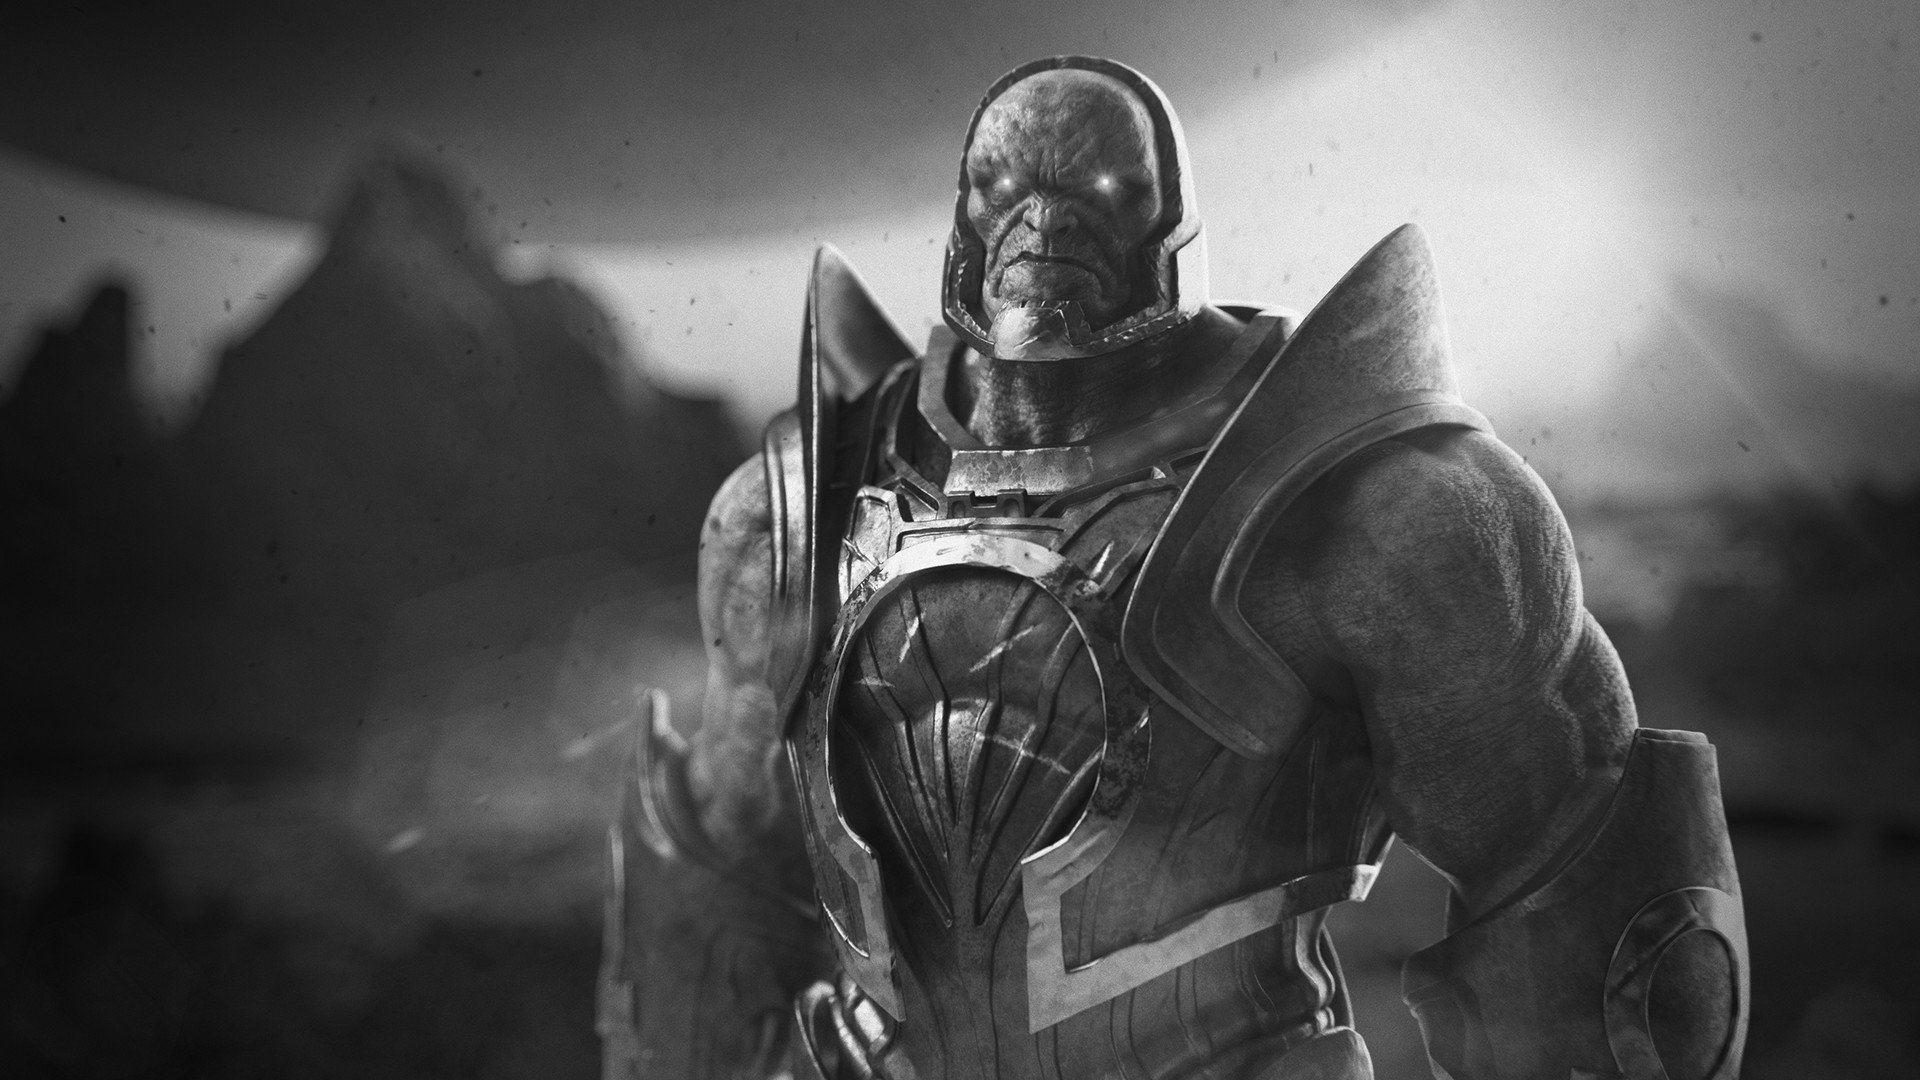 Comic lovers debate who would win in a fight between Thanos and Darkseid